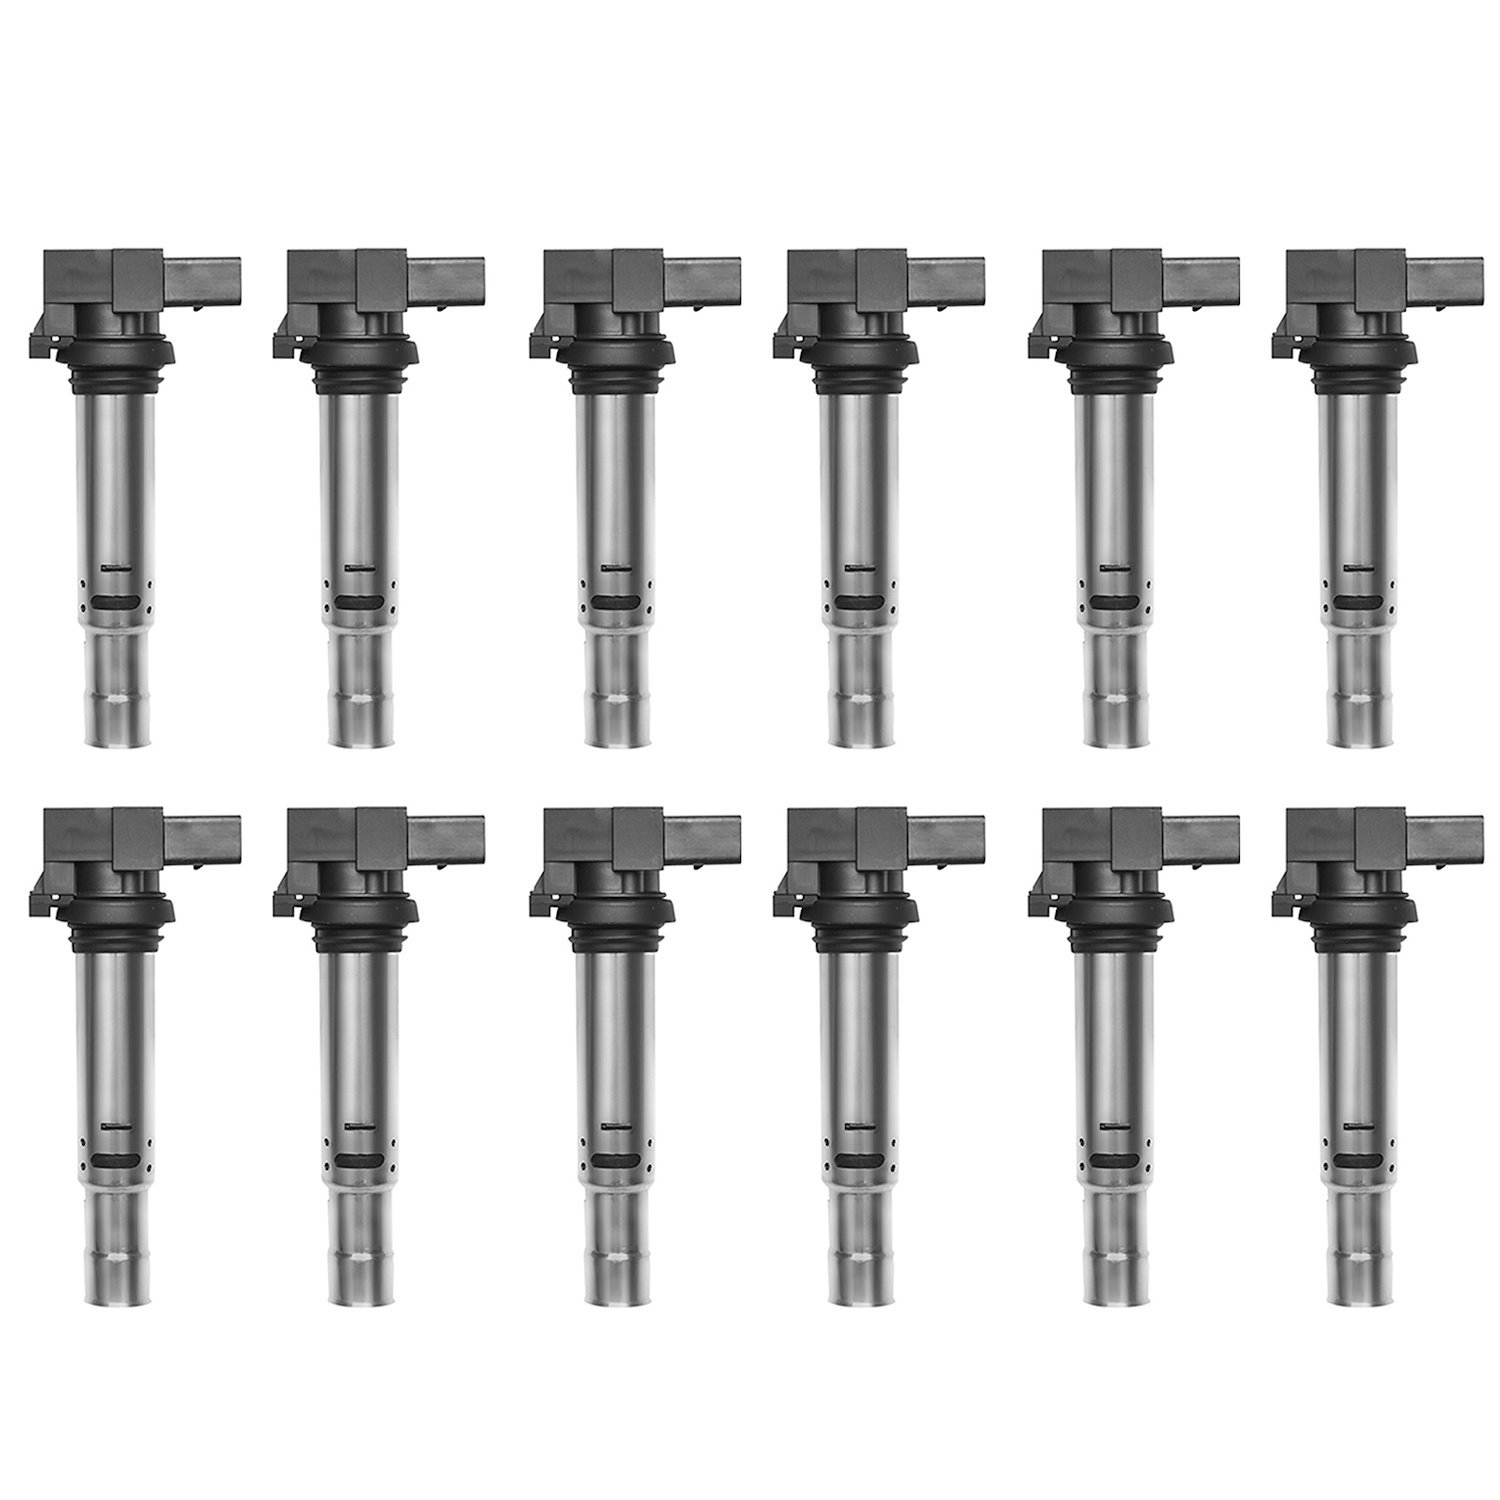 OE Replacement Ignition Coils for Volkswagen